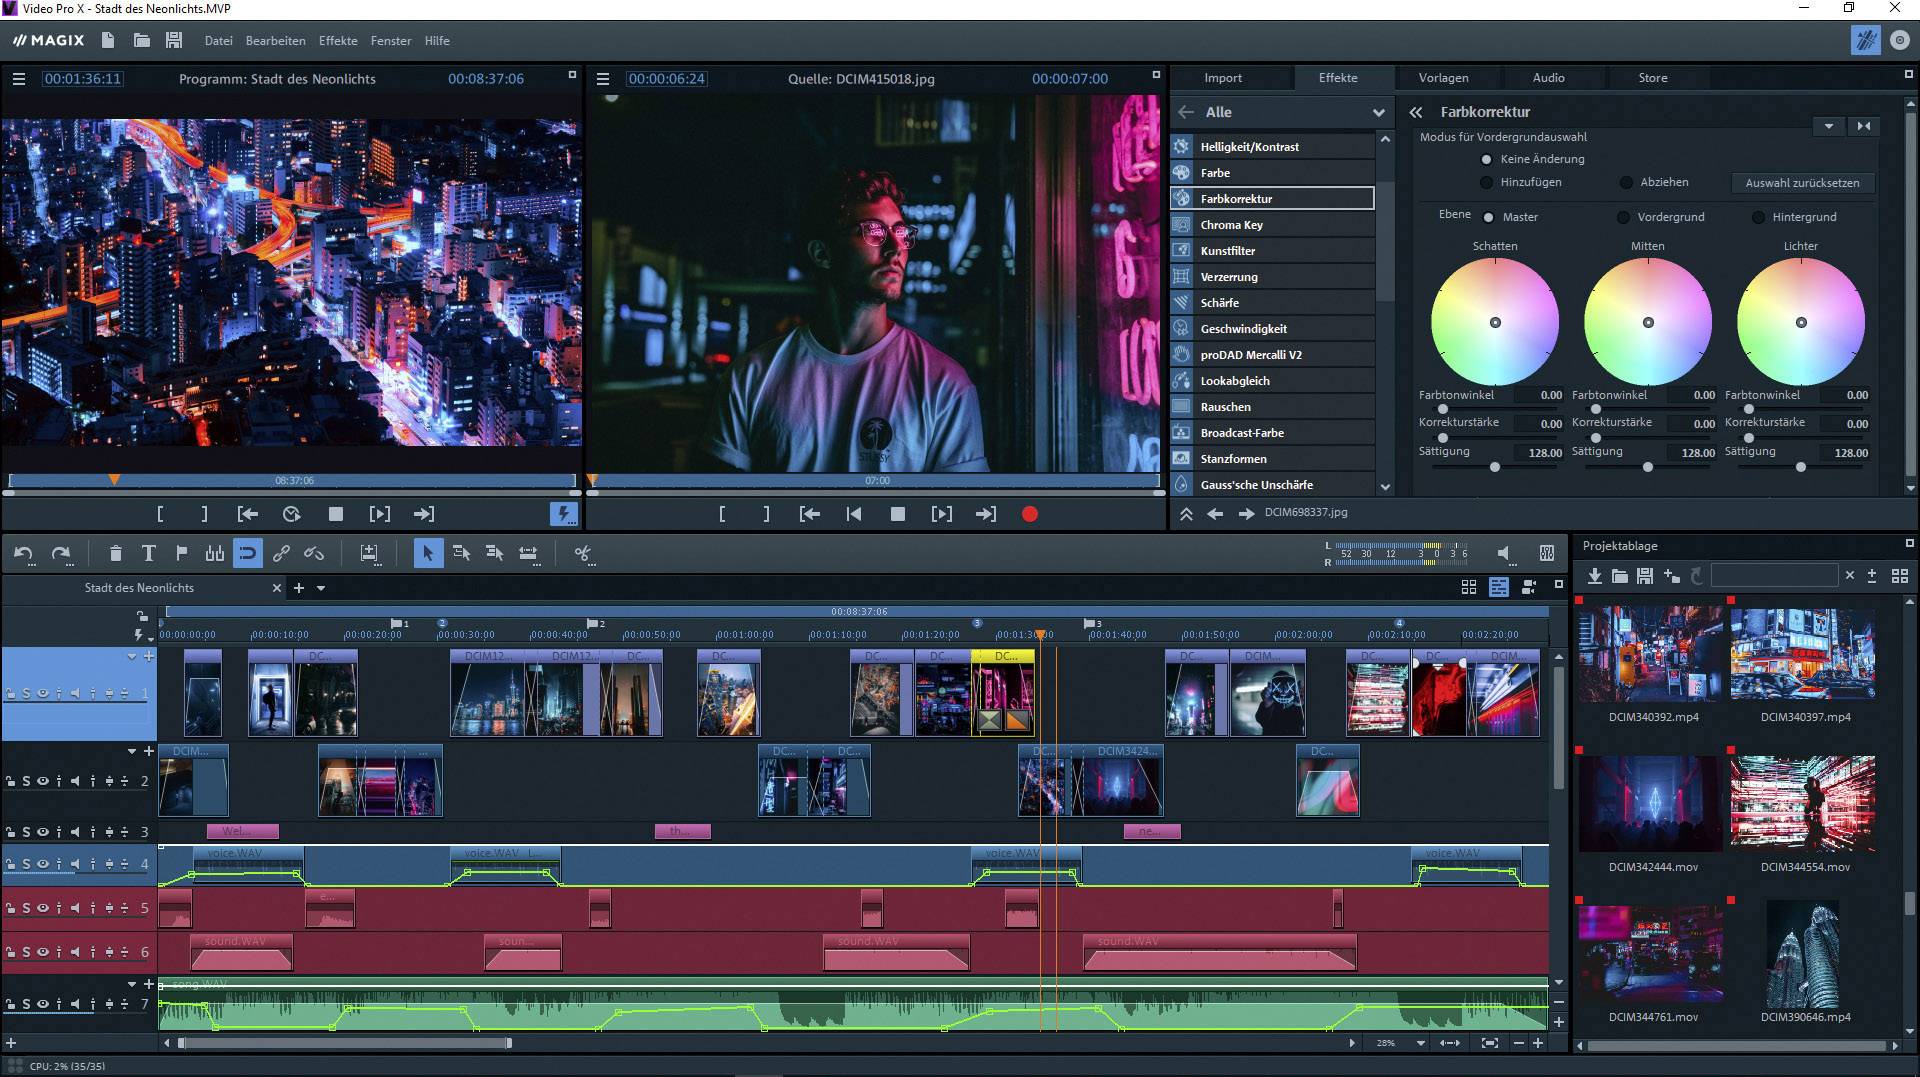 download the last version for android MAGIX Video Pro X15 v21.0.1.198